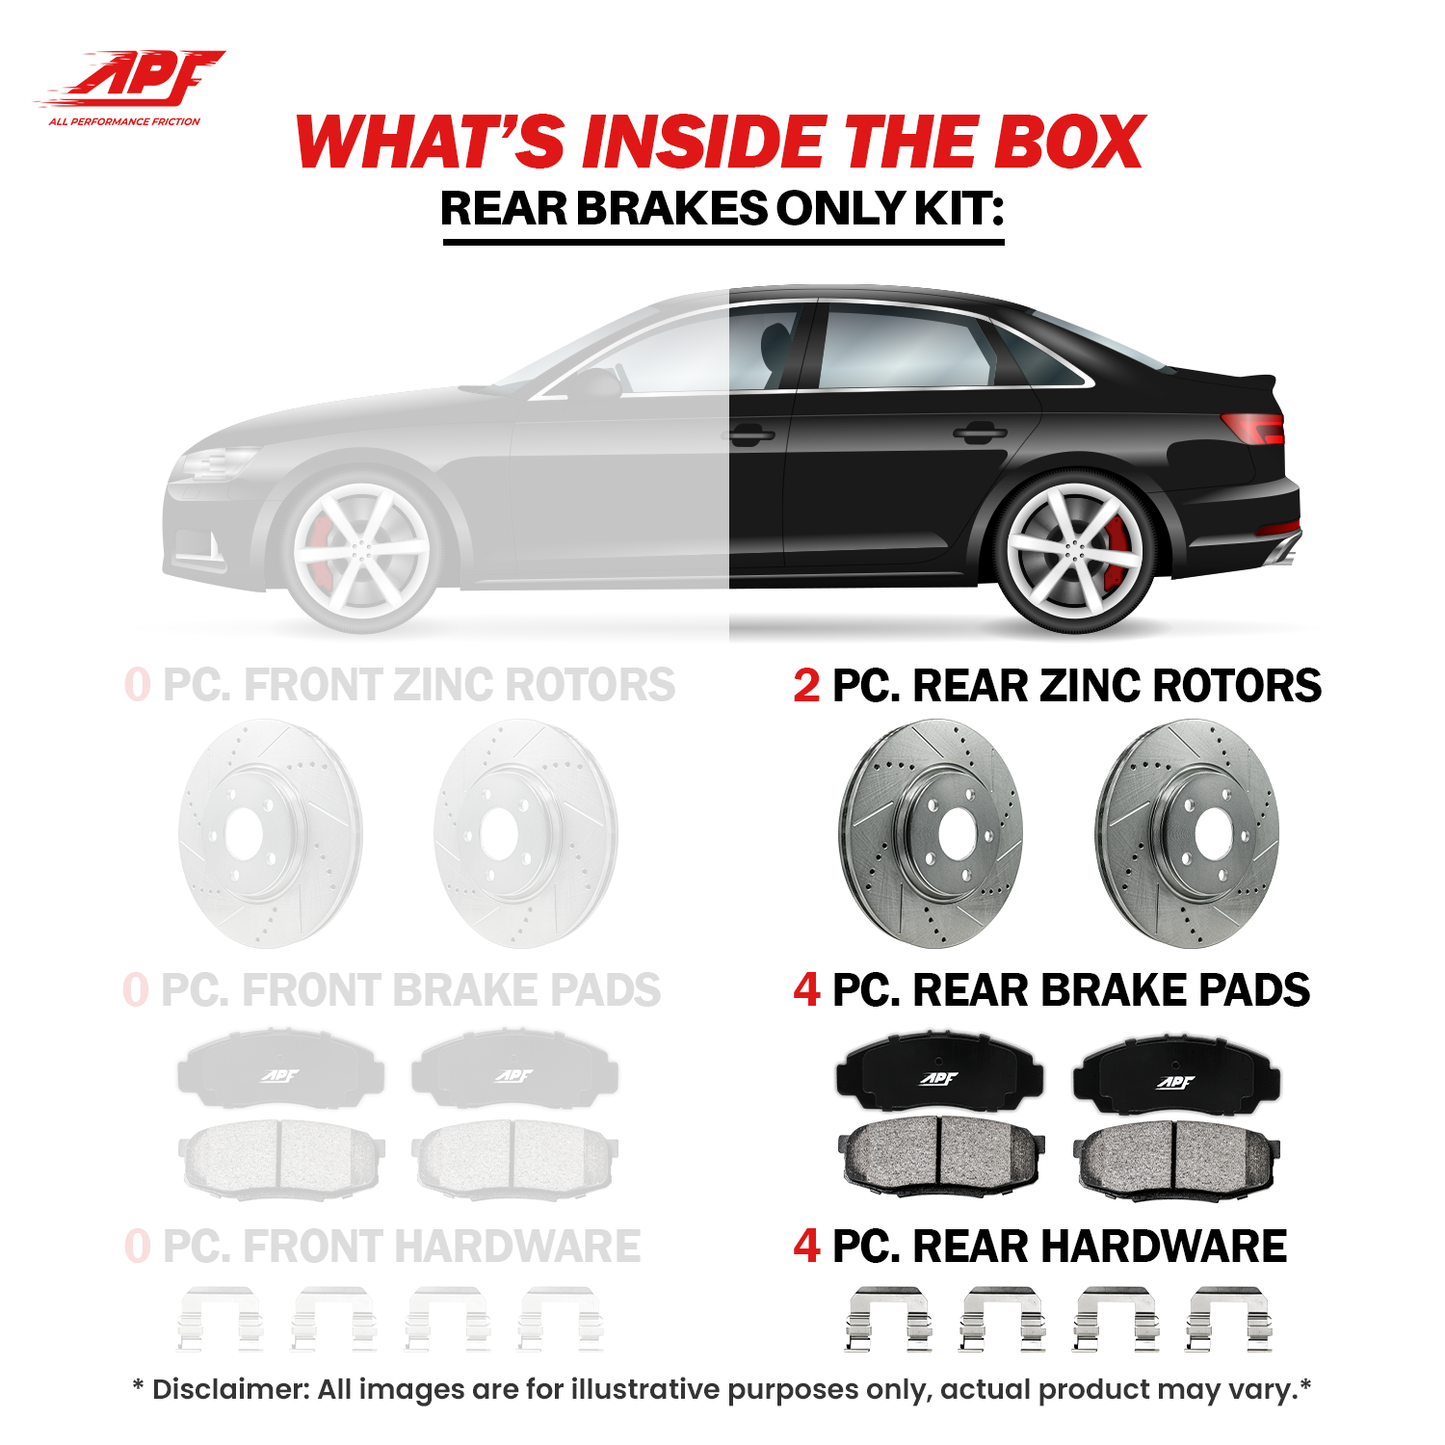 APF All Performance Friction Rear Rotors and Pads Half Kit compatible with Jeep Grand Cherokee 95-96 Zinc Drilled Slotted Rotors with Ceramic Carbon Fiber Brake Pads | $95.9